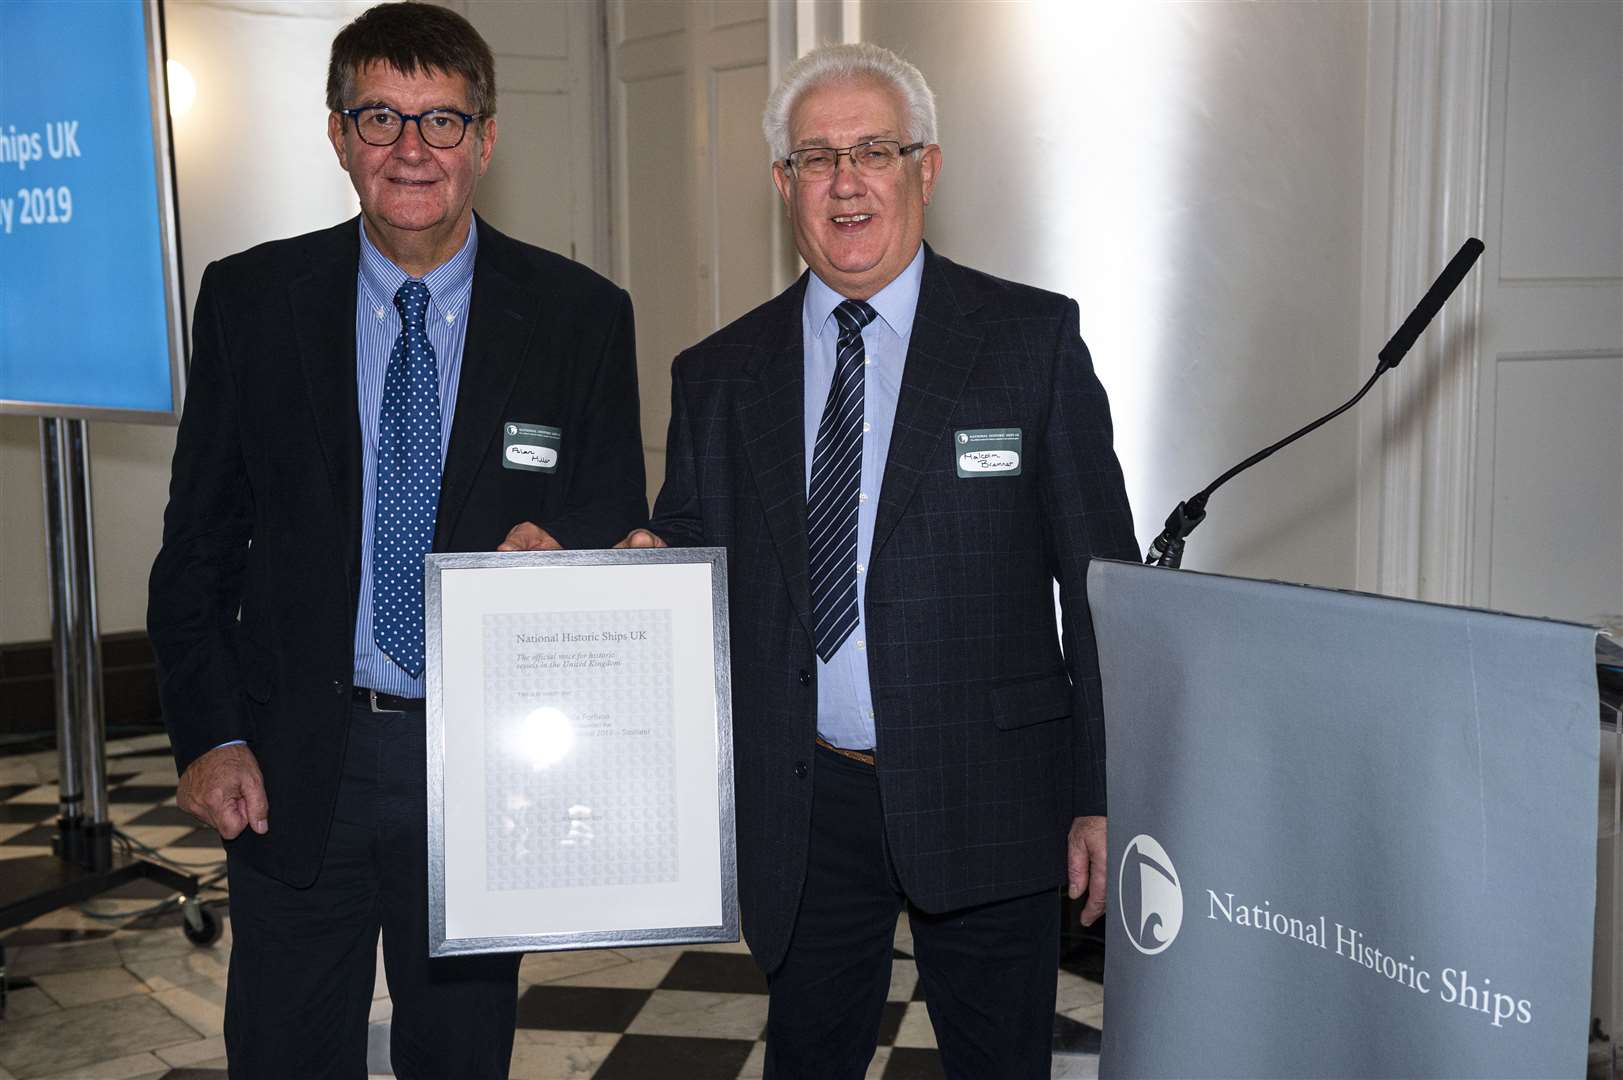 Wick Society boat section secretary Alan Miller (left) with Malcolm Bremner at the awards ceremony in Greenwich, London. Pictures: National Historic Ships UK